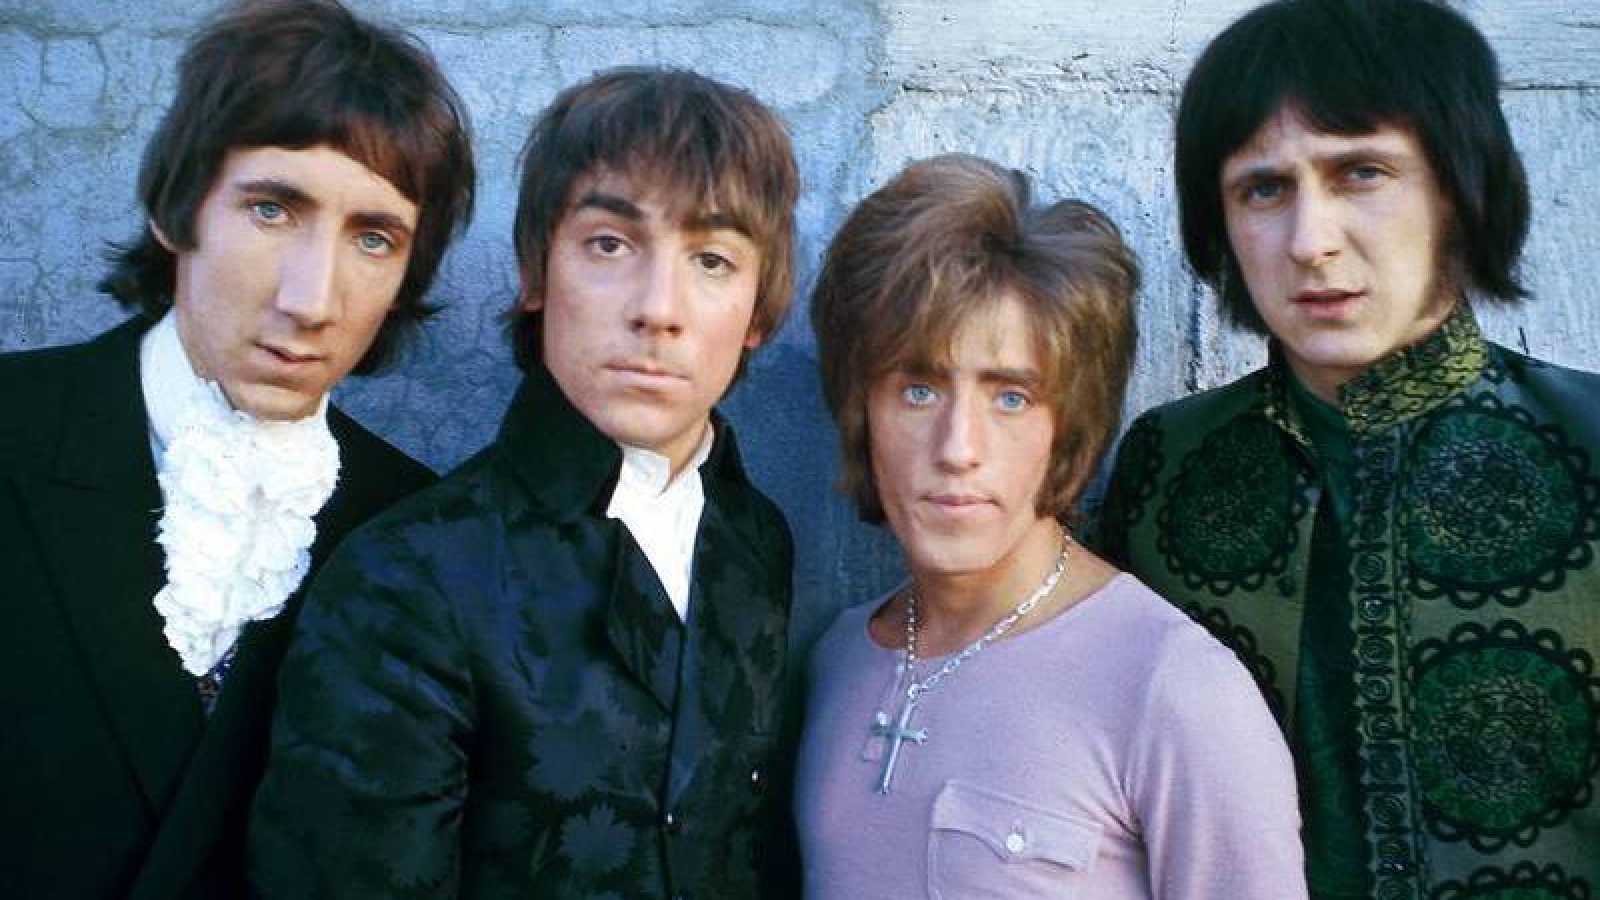 Photo of Roger DALTREY and Pete TOWNSHEND and WHO and Keith MOON and John ENTWISTLE